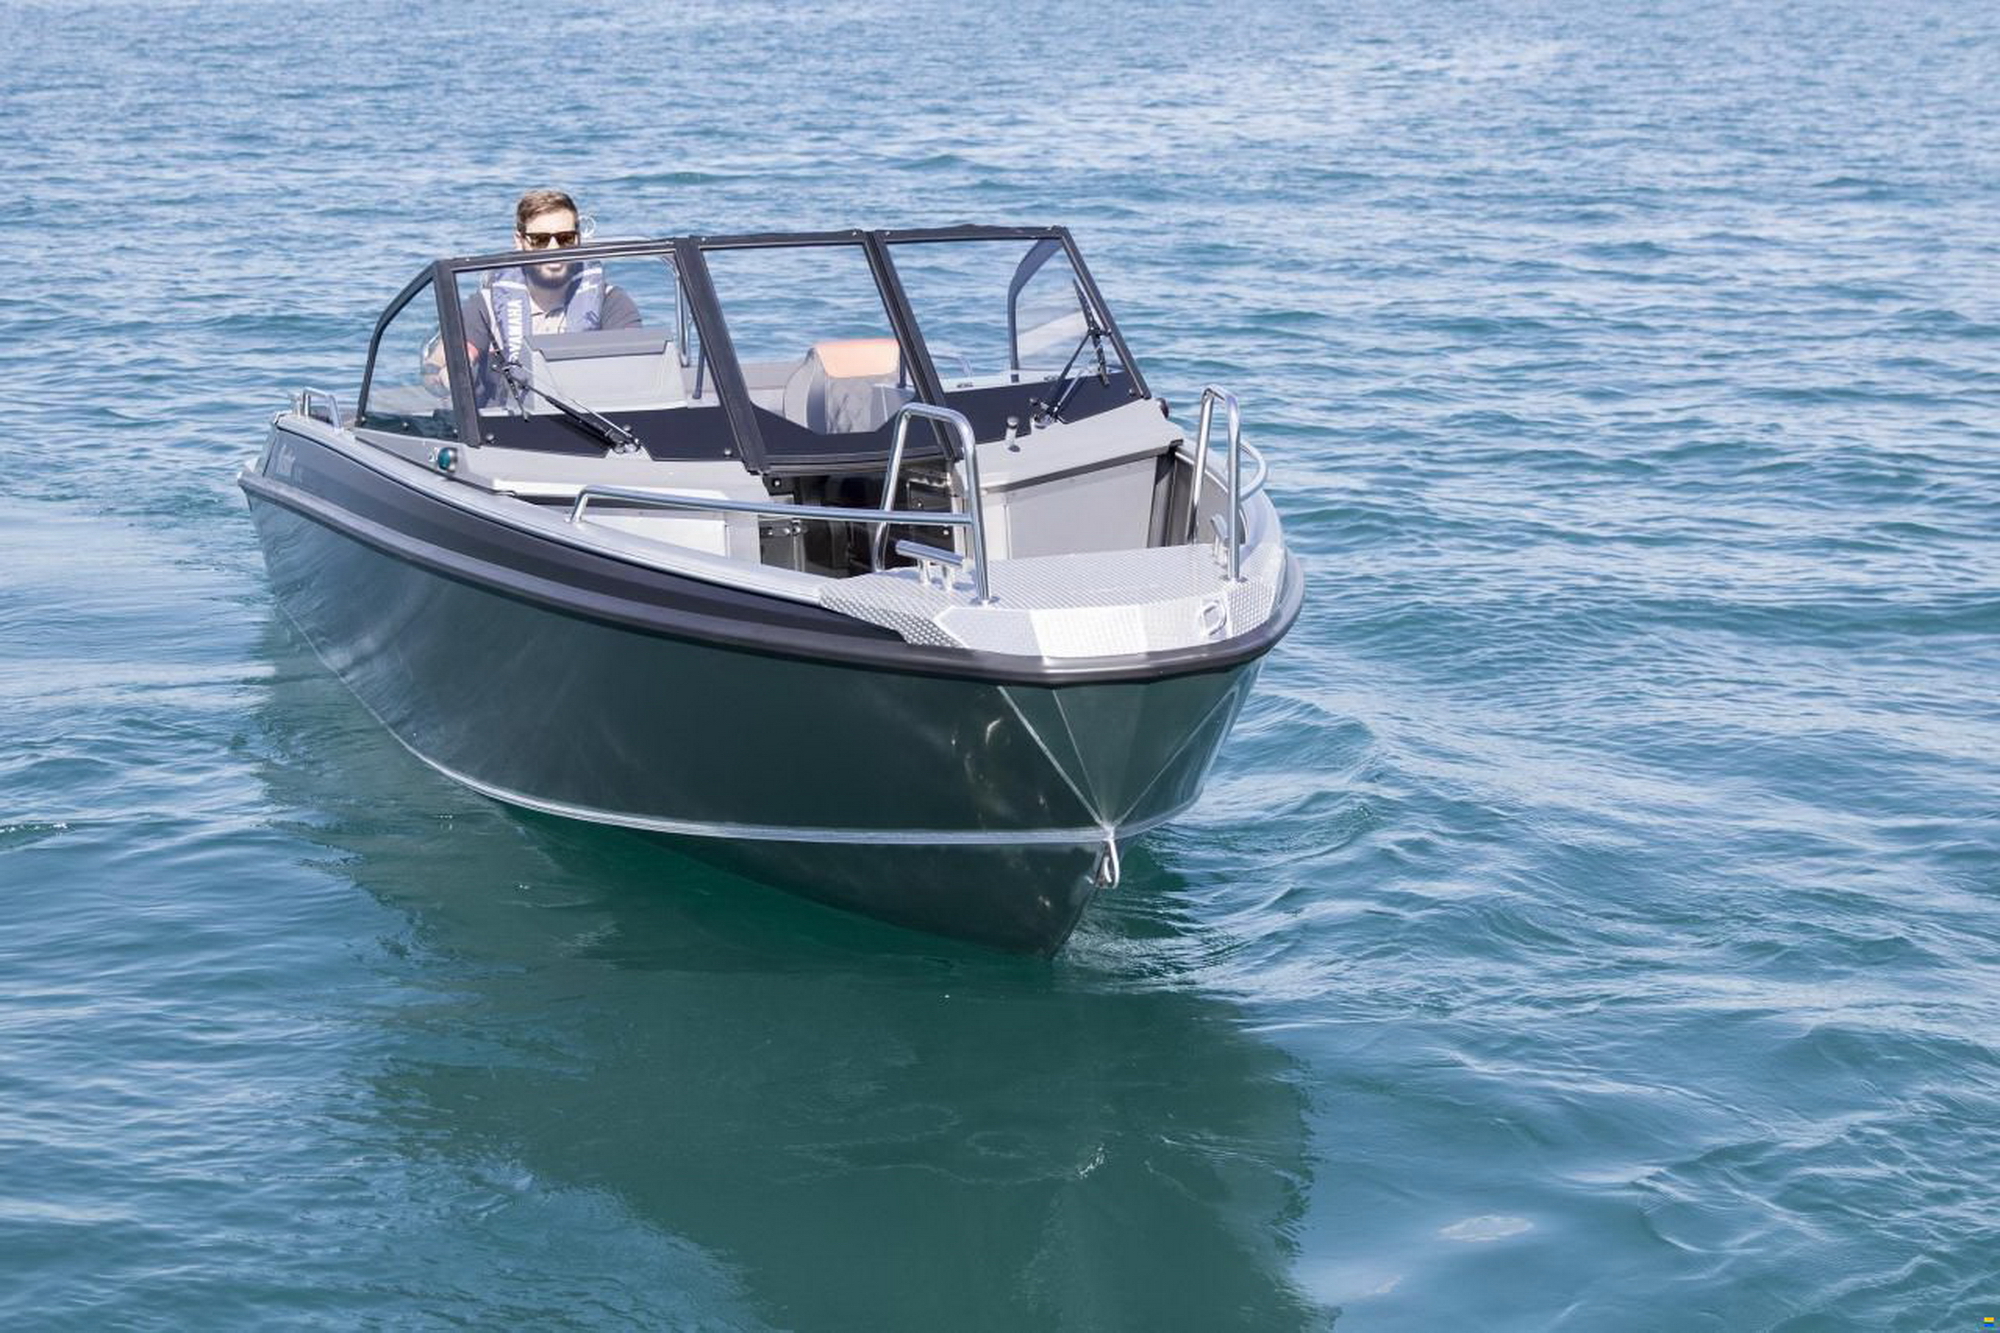 BUSTER XXL Q, BUSTER XXL, Алюминиевая лодка Buster, Алюминиевая лодка Buster XXL Q, Aluminium boat BUSTER XXL Q, Алюминиевая лодка Buster XXL, Aluminium boat BUSTER XXL, FISHFINDER package BUSTER XXL, FISHFINDER package buster, FISHFINDER package, fishing kit accessories buster